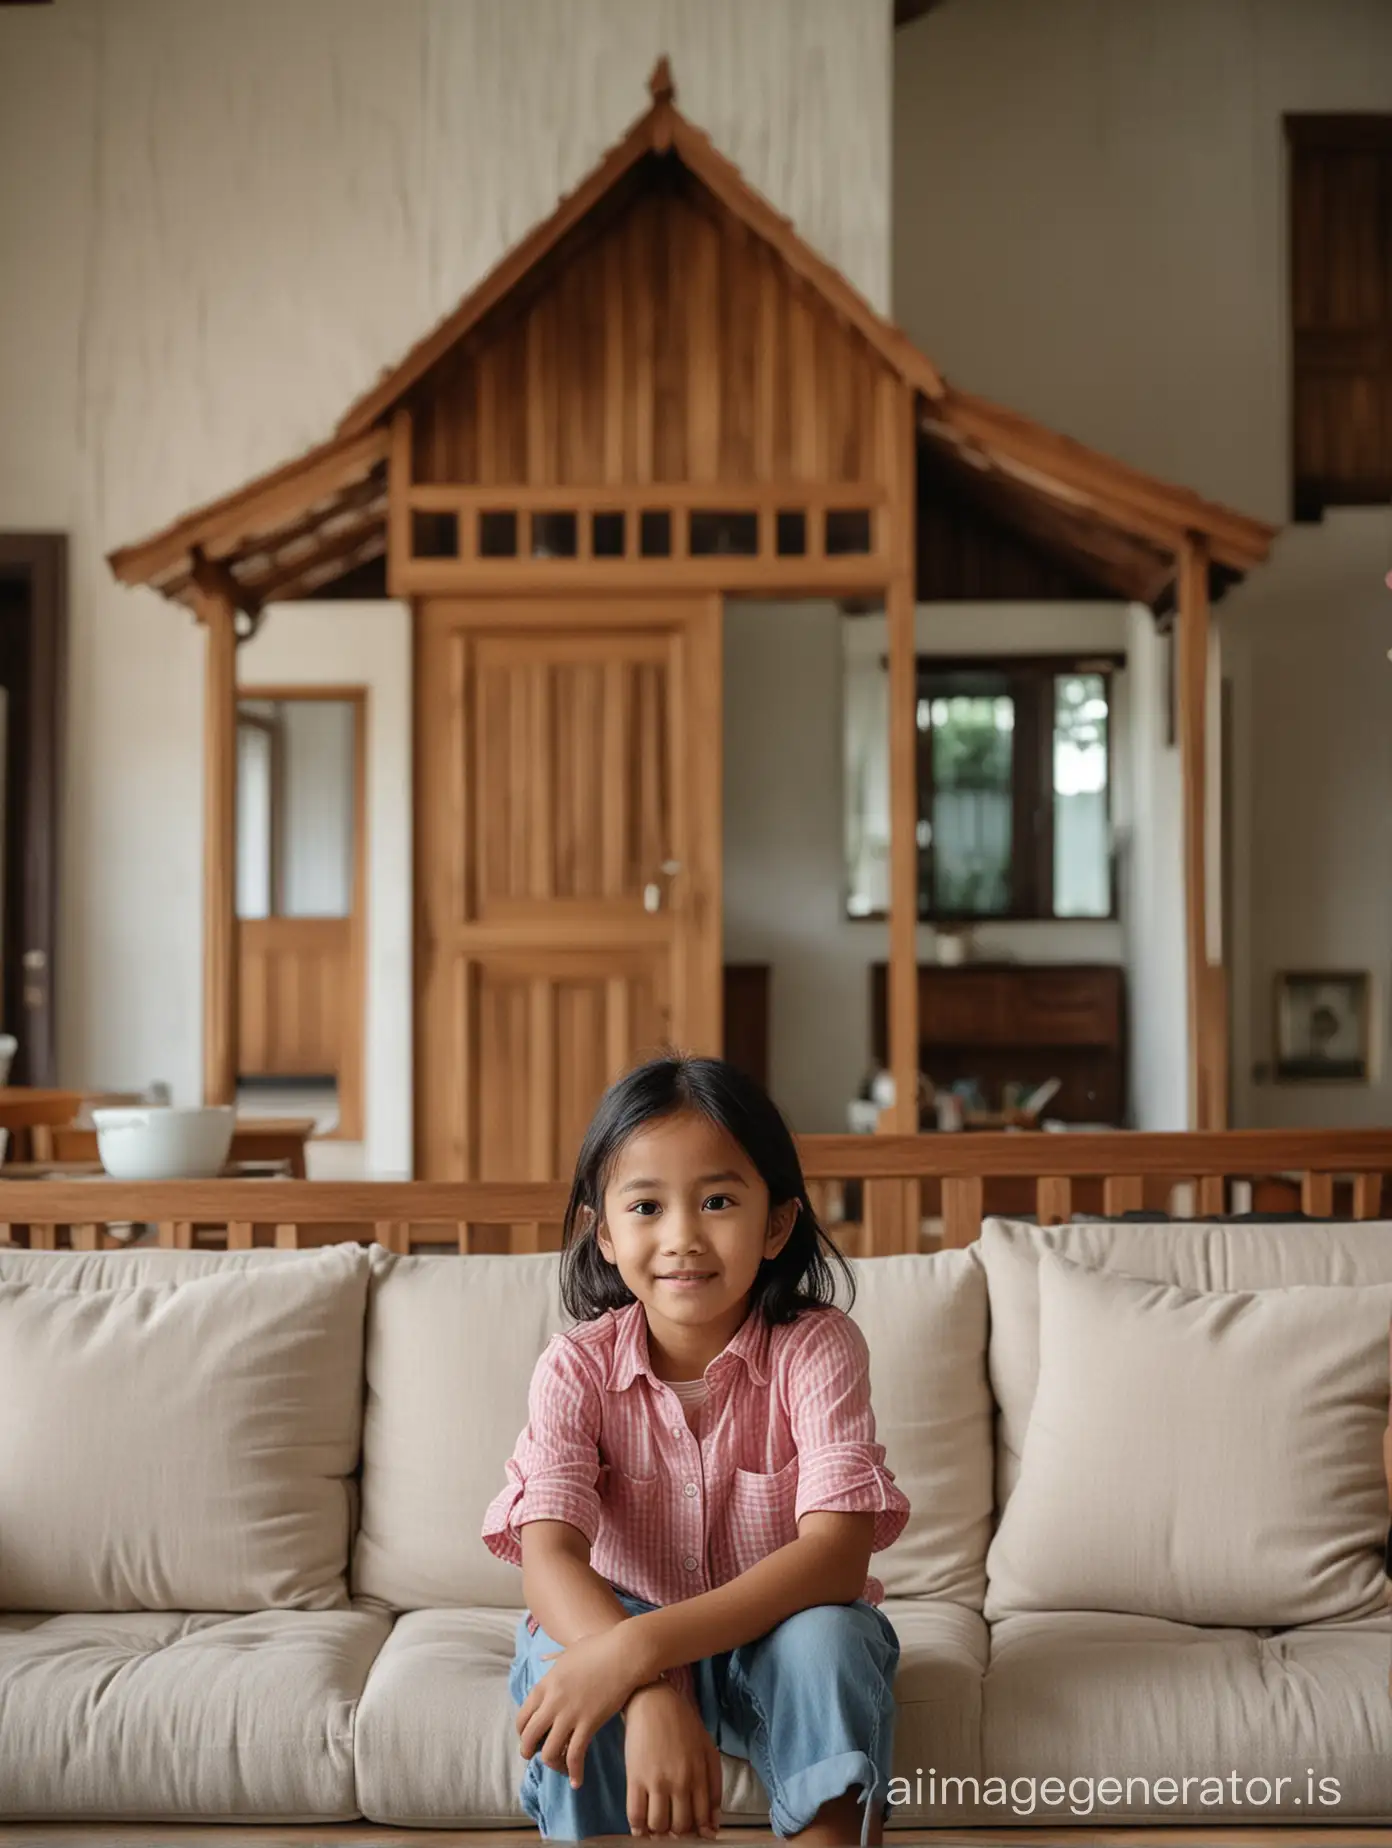 Indonesian-Girl-Relaxing-on-Sofa-in-Classic-Wooden-House-Setting